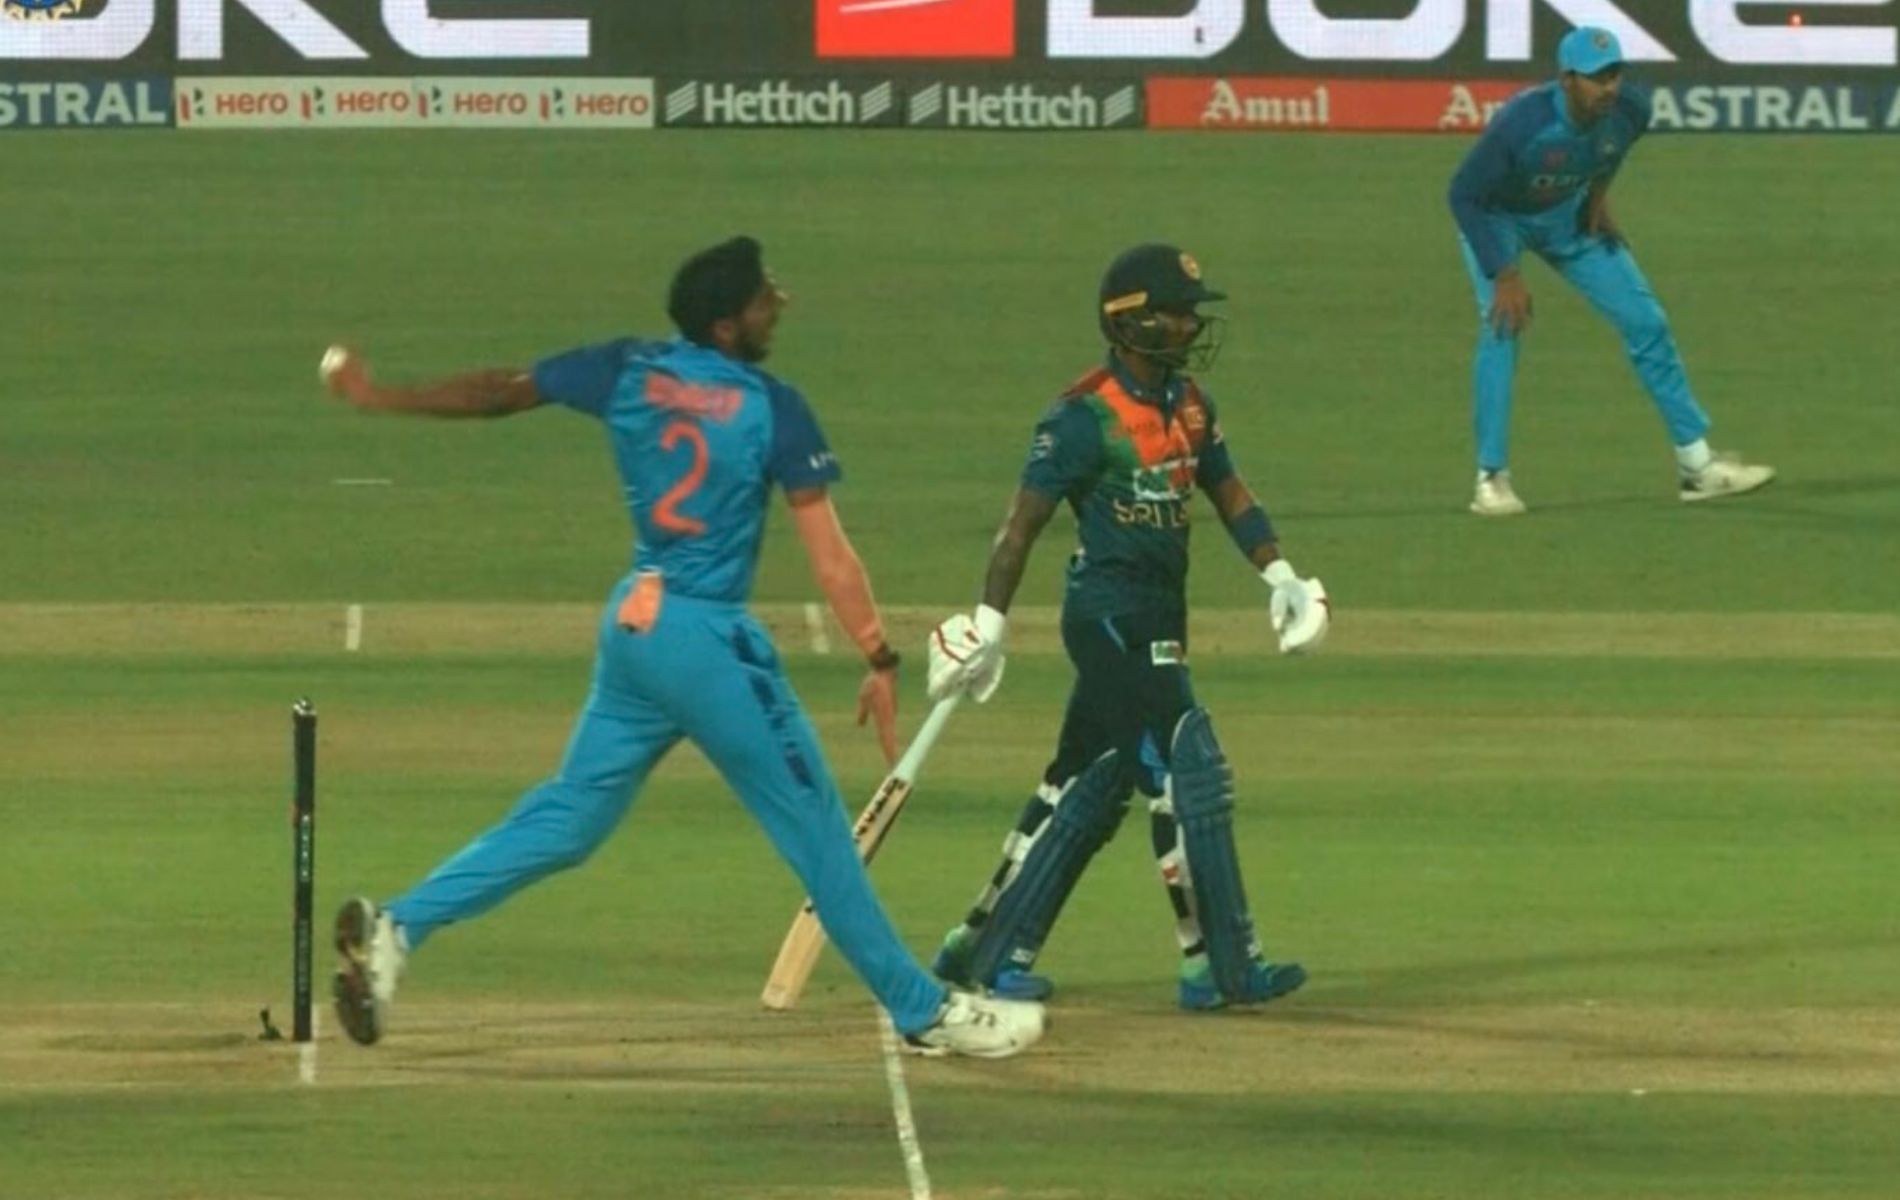 Arshdeep Singh (L) conceded 19 runs from his first over. (Pic: Disney+Hotstar)